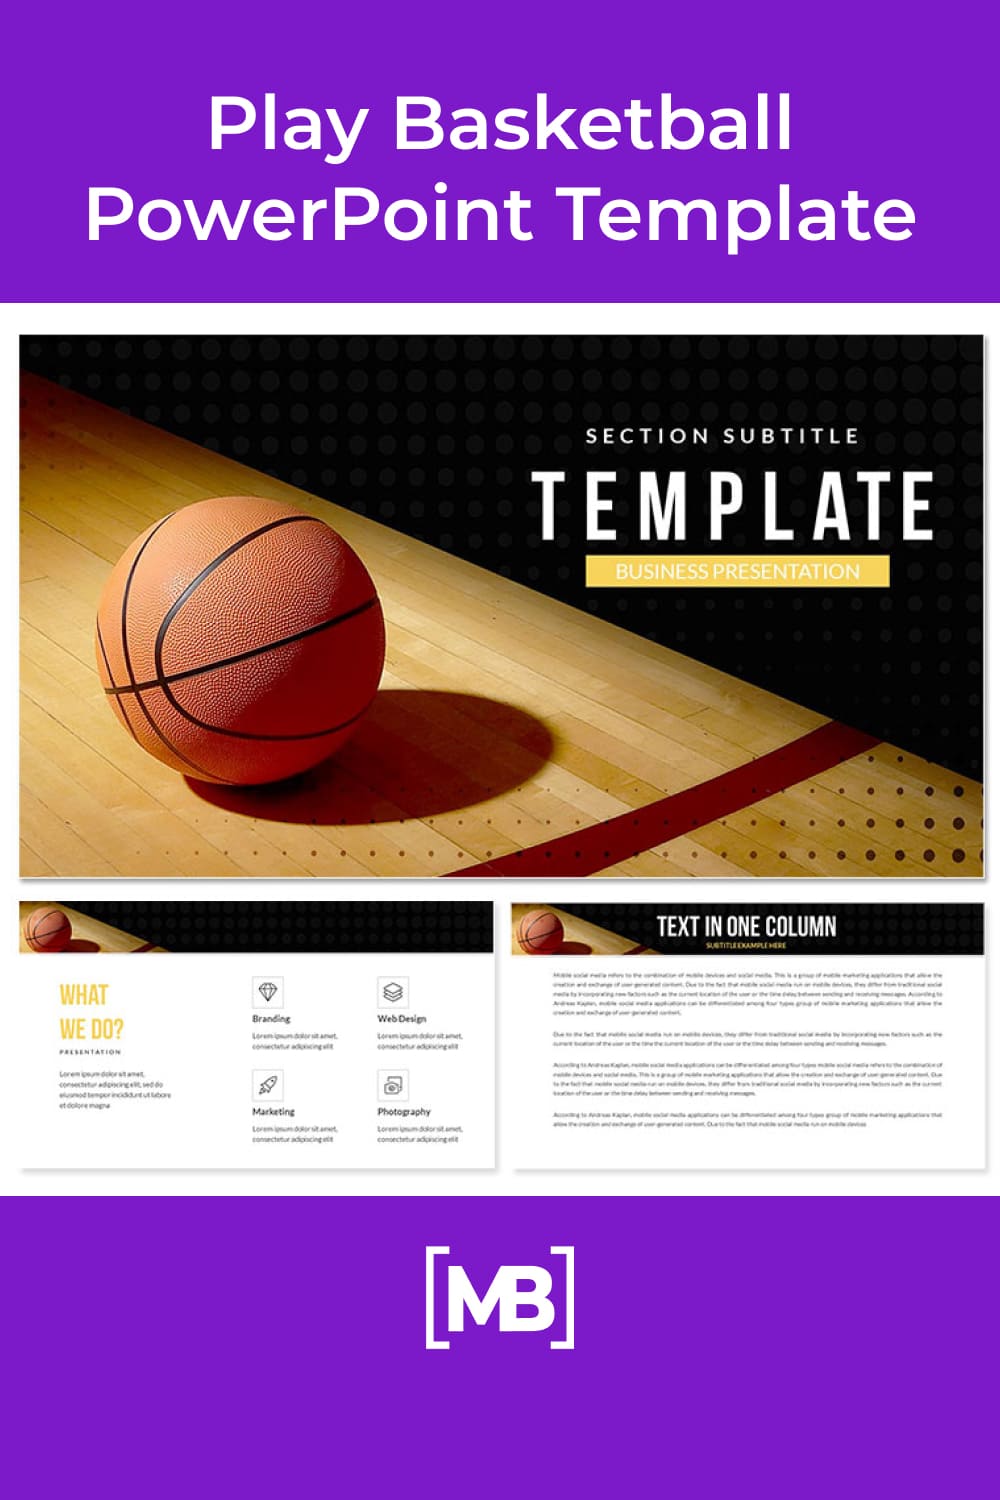 Template rich in themed graphics and infographics.